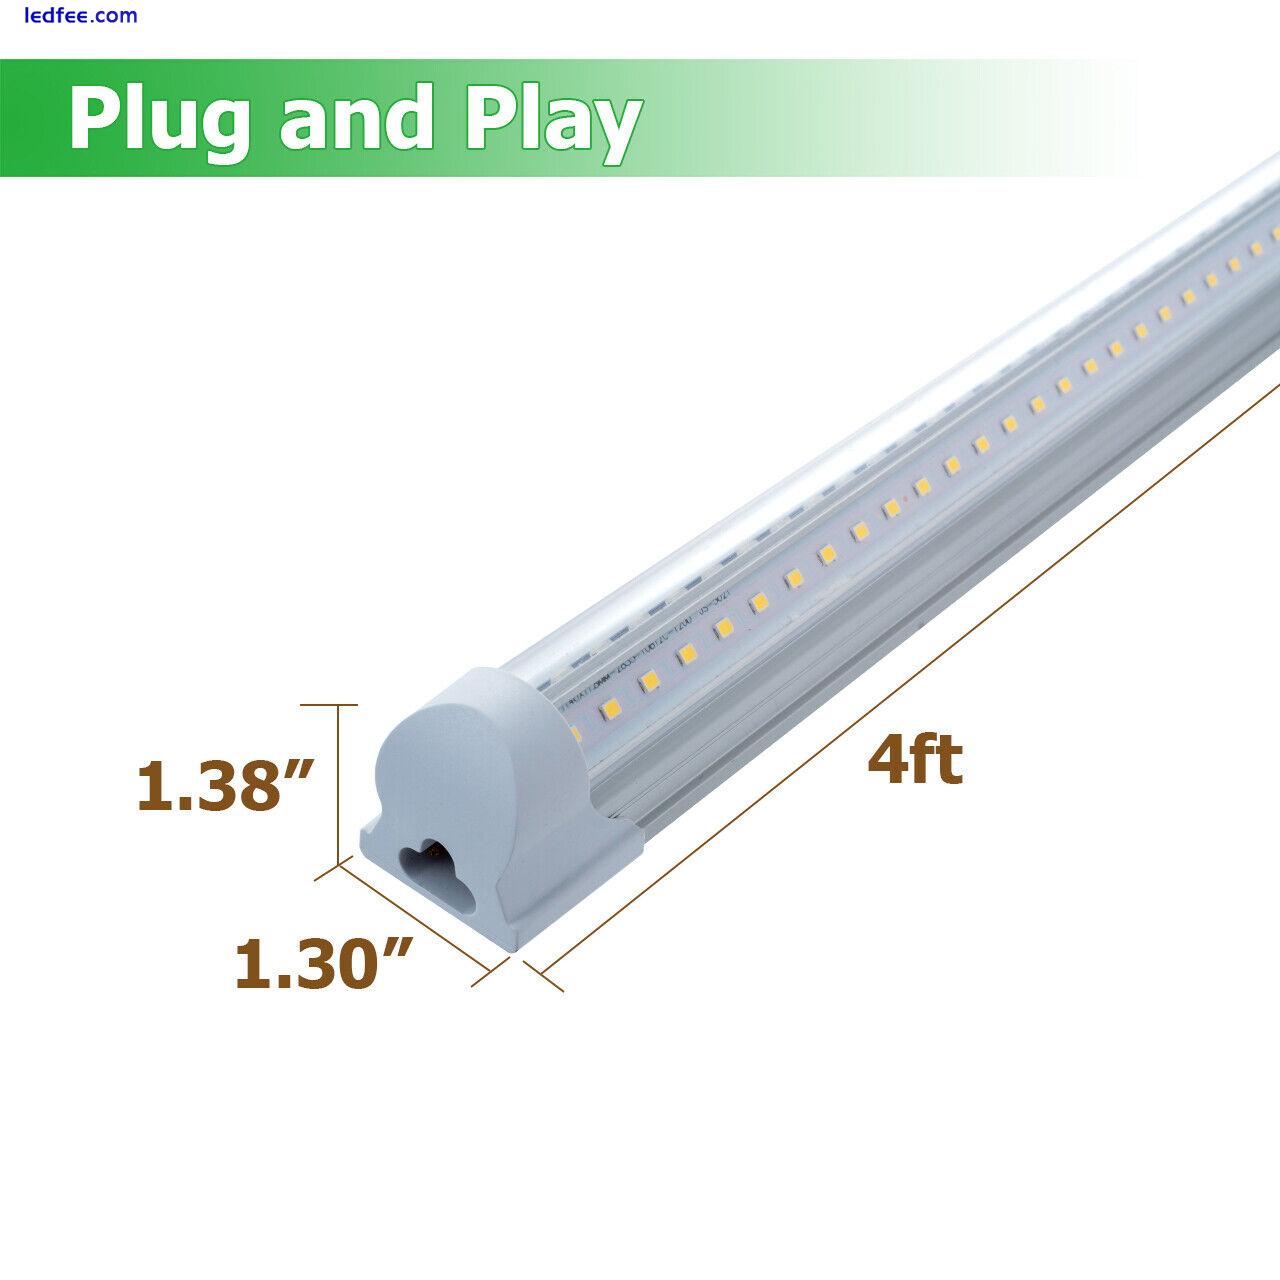 4FT 12 Pack LED Shop Light T8 Linkable Ceiling Tube Fixture 40W Daylight Clear 2 